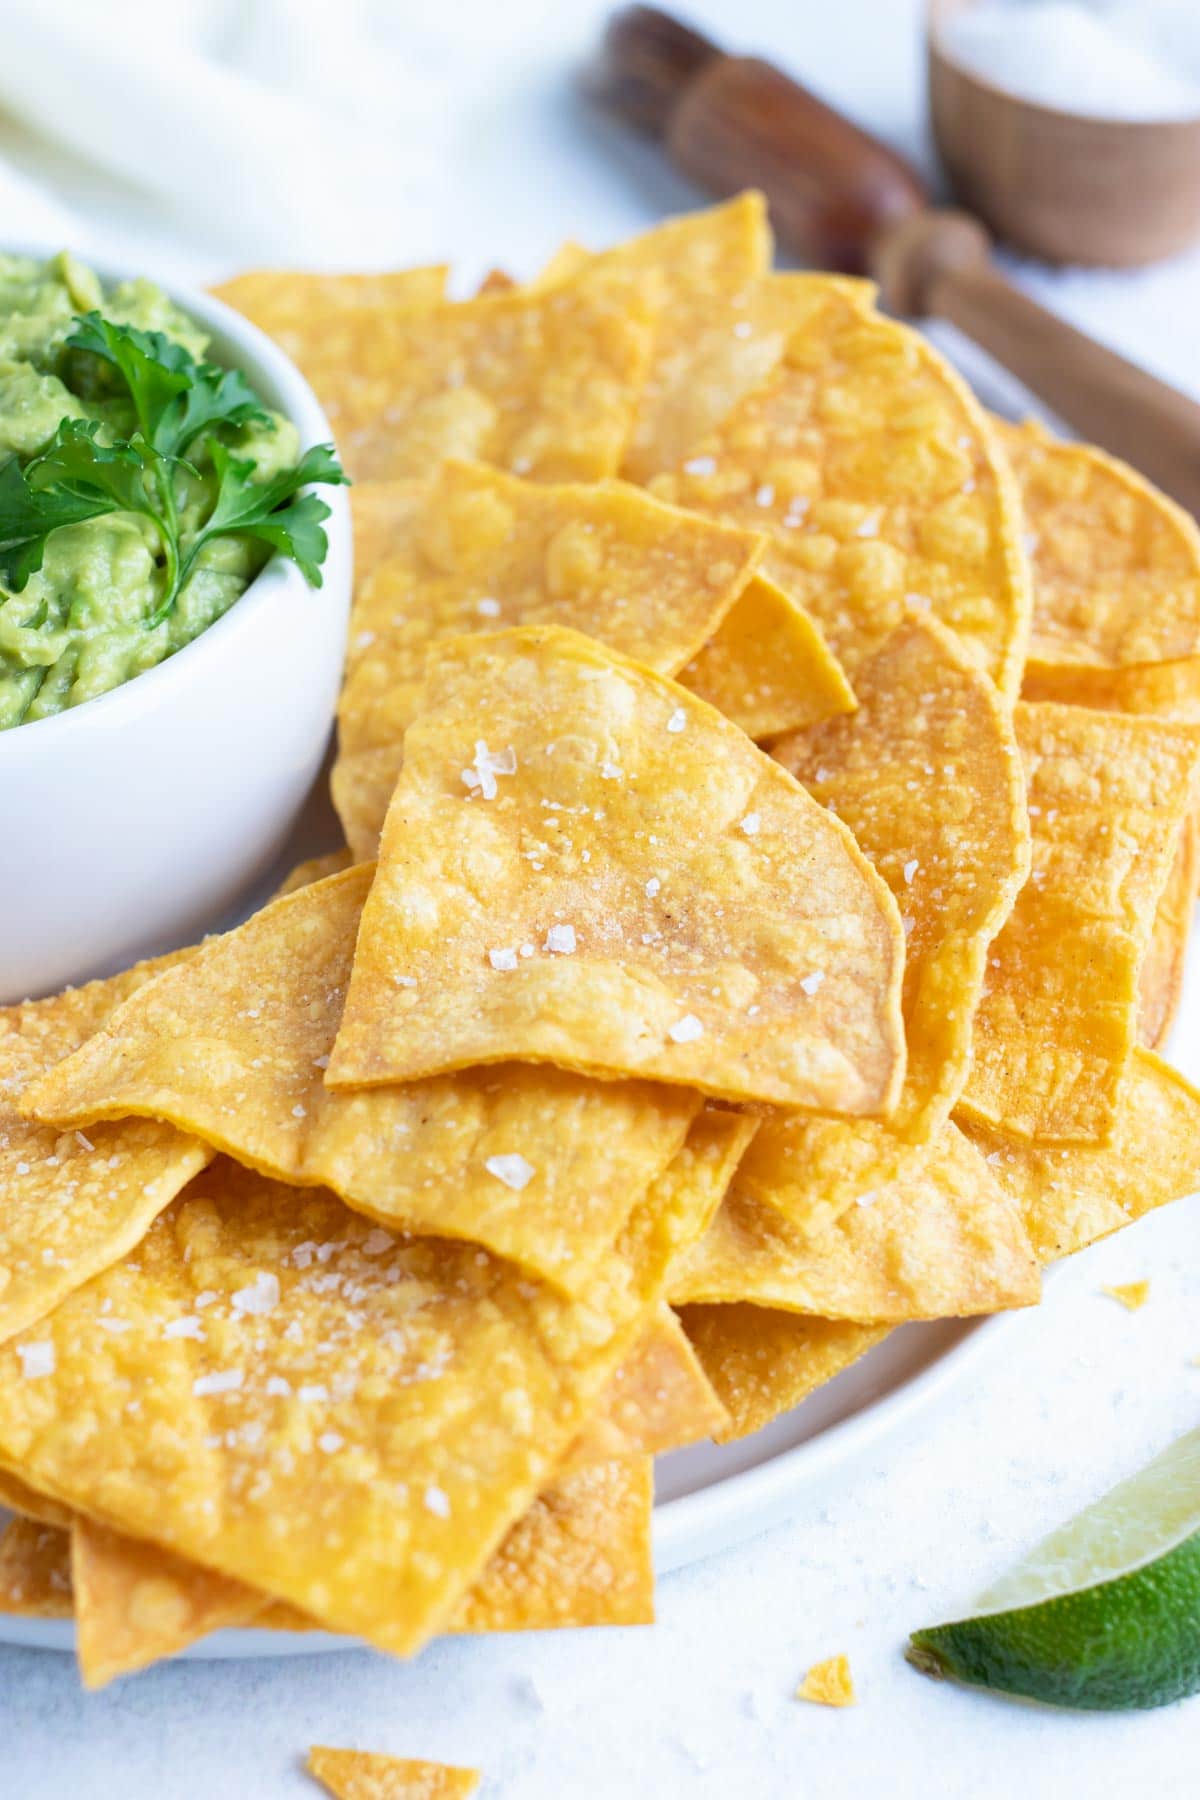 Mission Foods Yellow Tortilla Chips Case | FoodServiceDirect